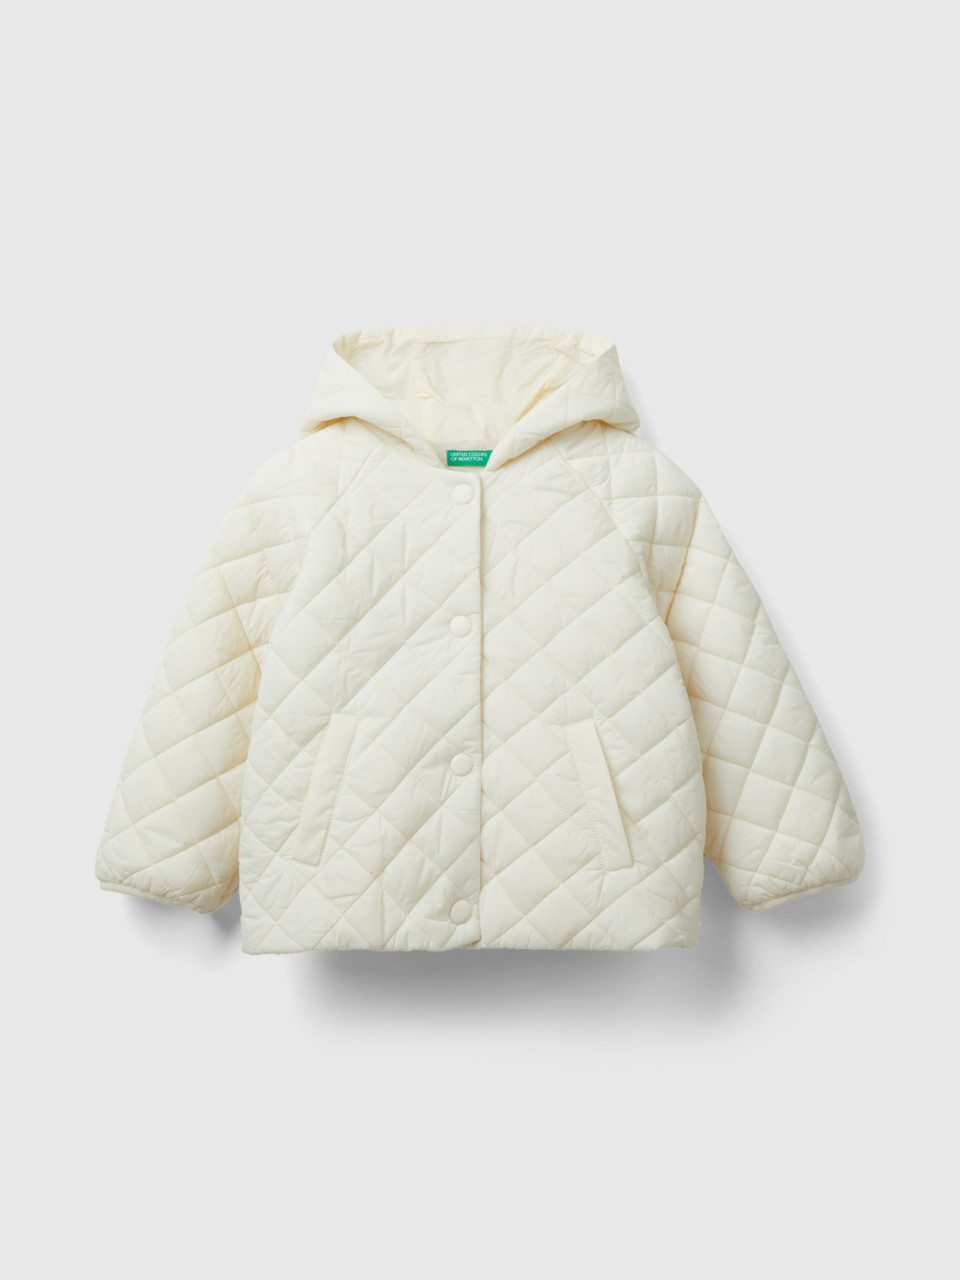 Benetton, Light Quilted Jacket, Creamy White, Kids